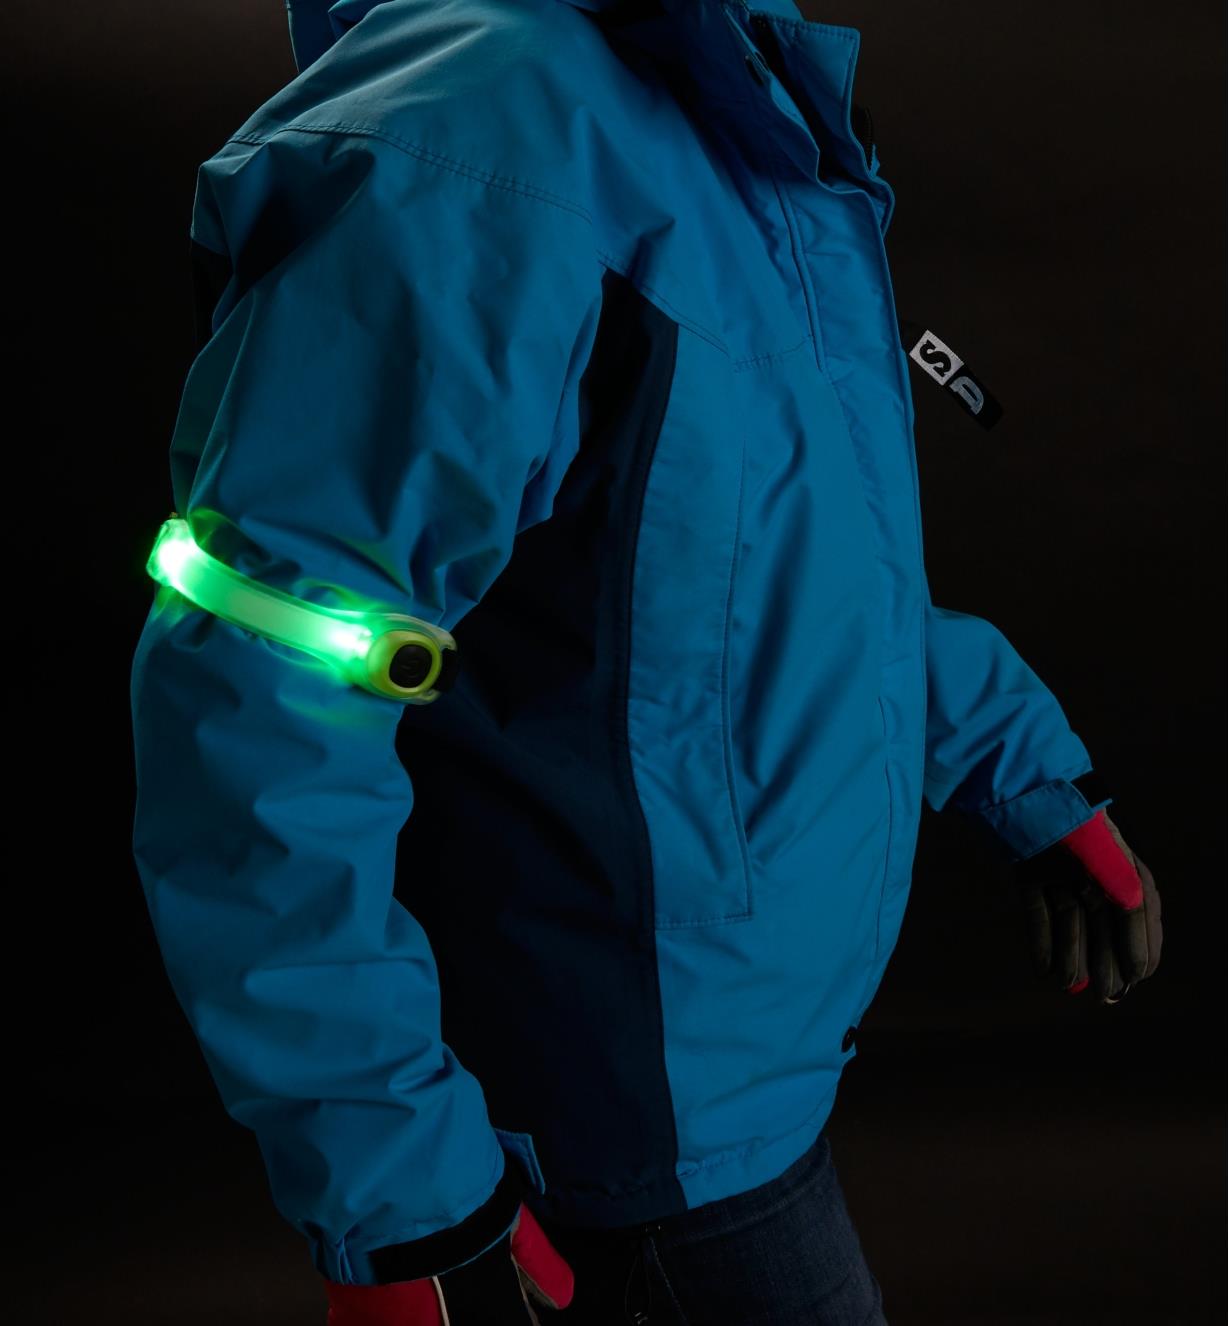 Green Wrap Light wrapped around the arm of a person's jacket at night